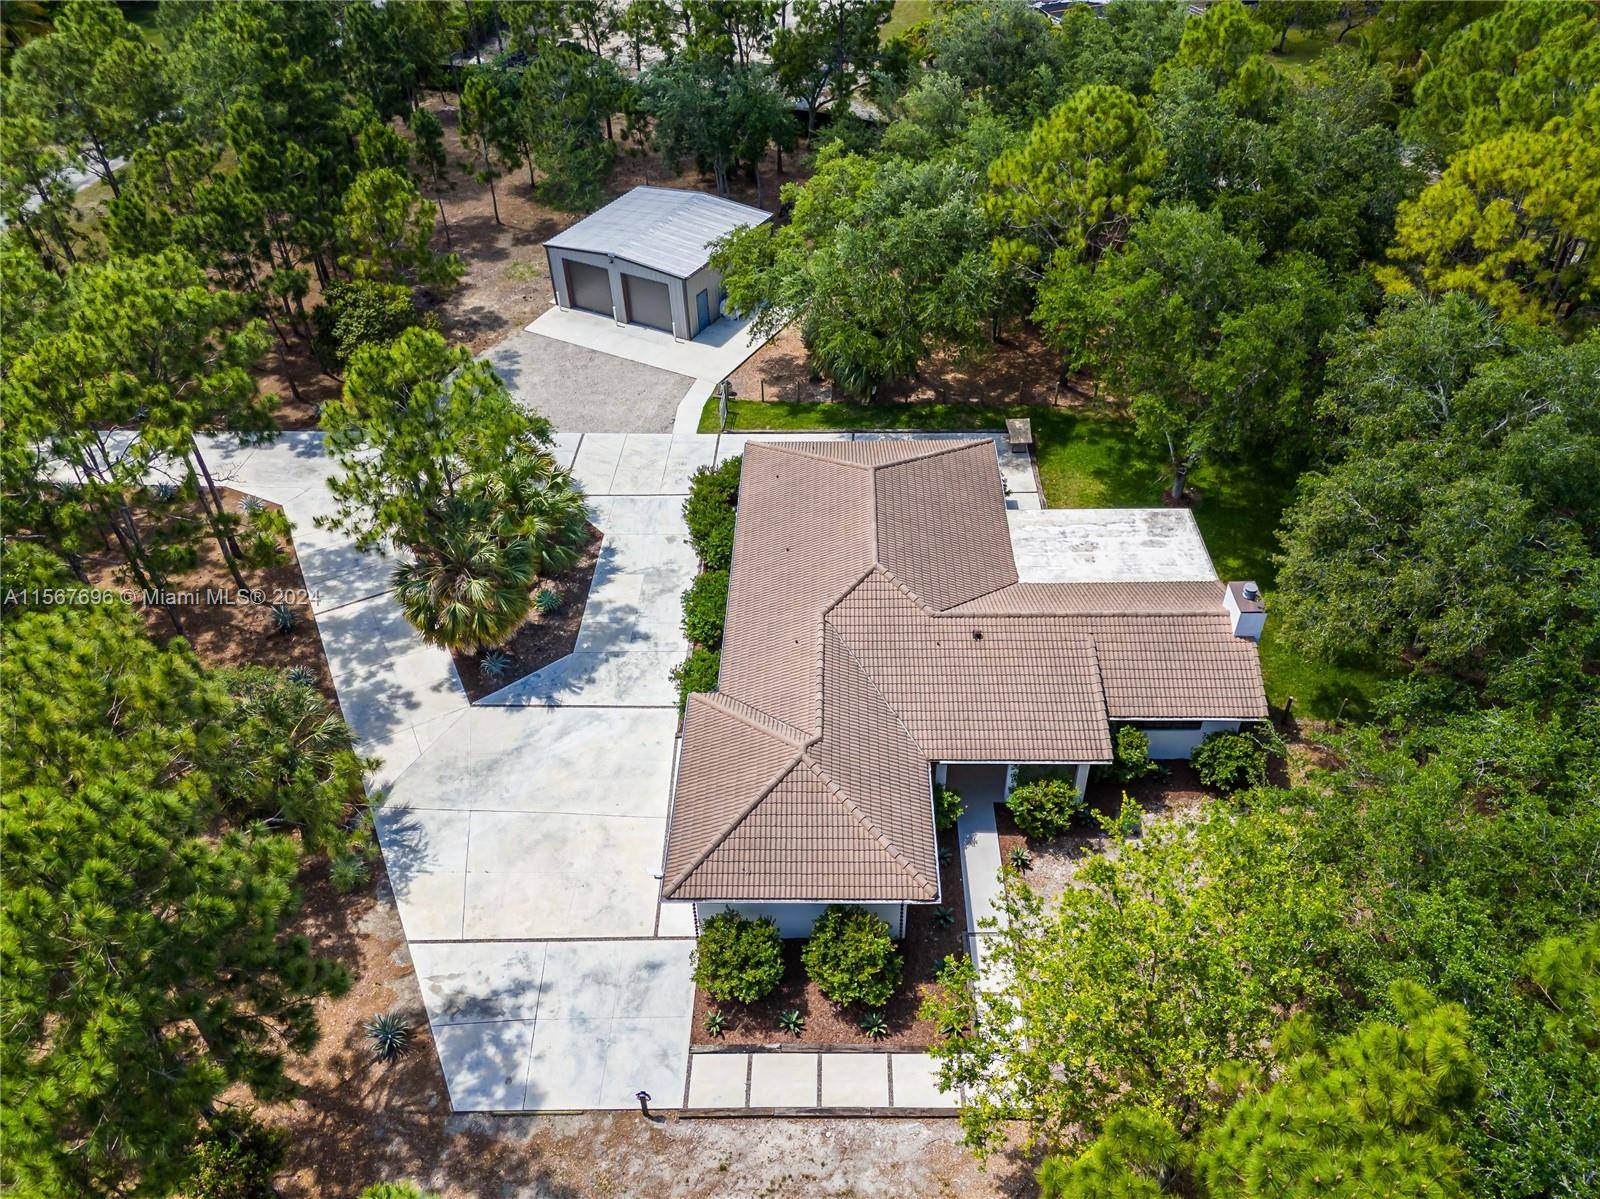 STUNNING 3. 05 ACRE COUNTRY HOME IN A FOREST OF OAKS PINE TREES.